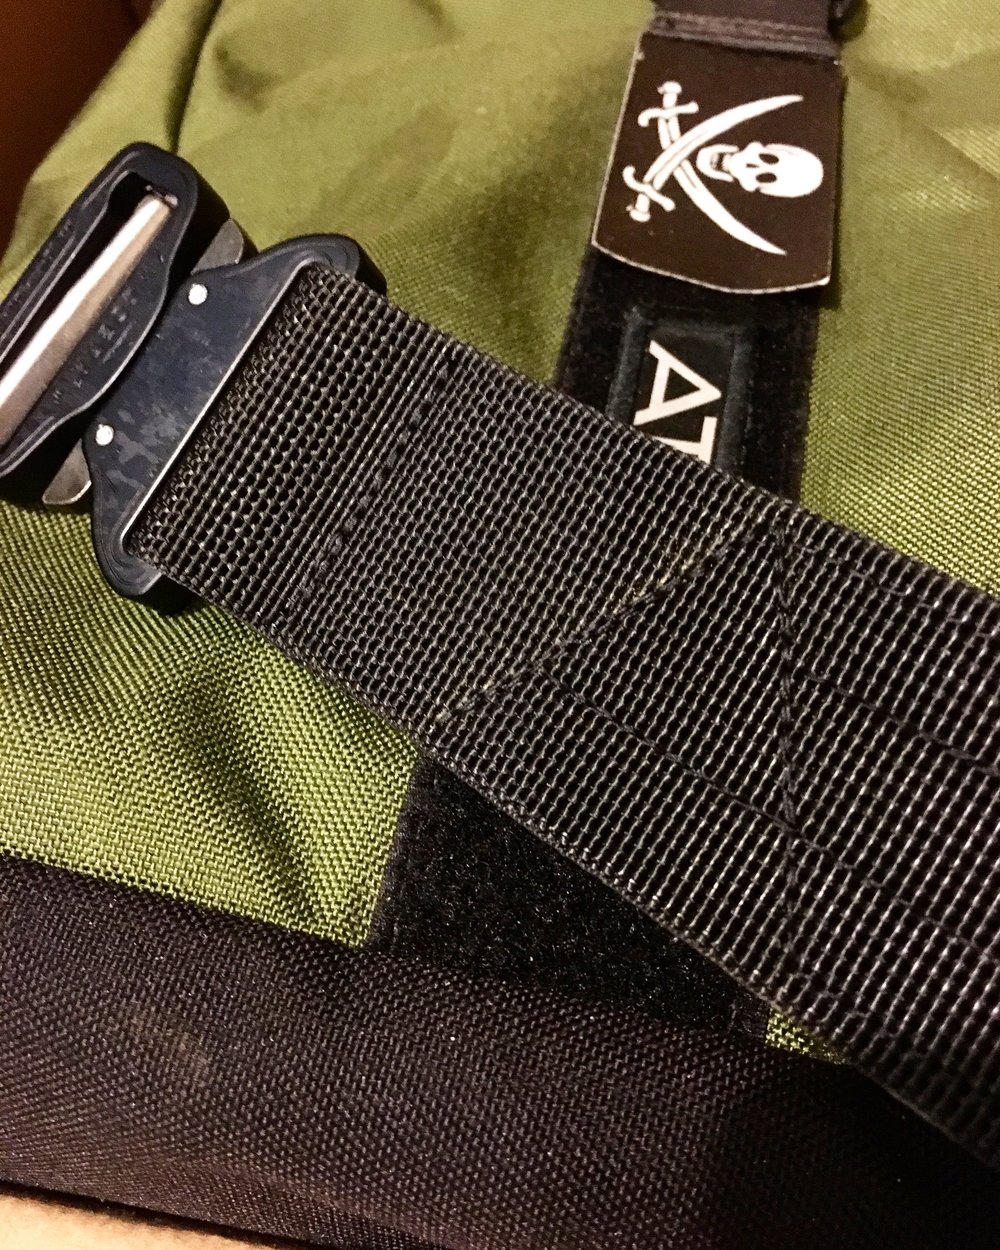 SubSecond Tactical Gun Belts & Gear – Subsecond